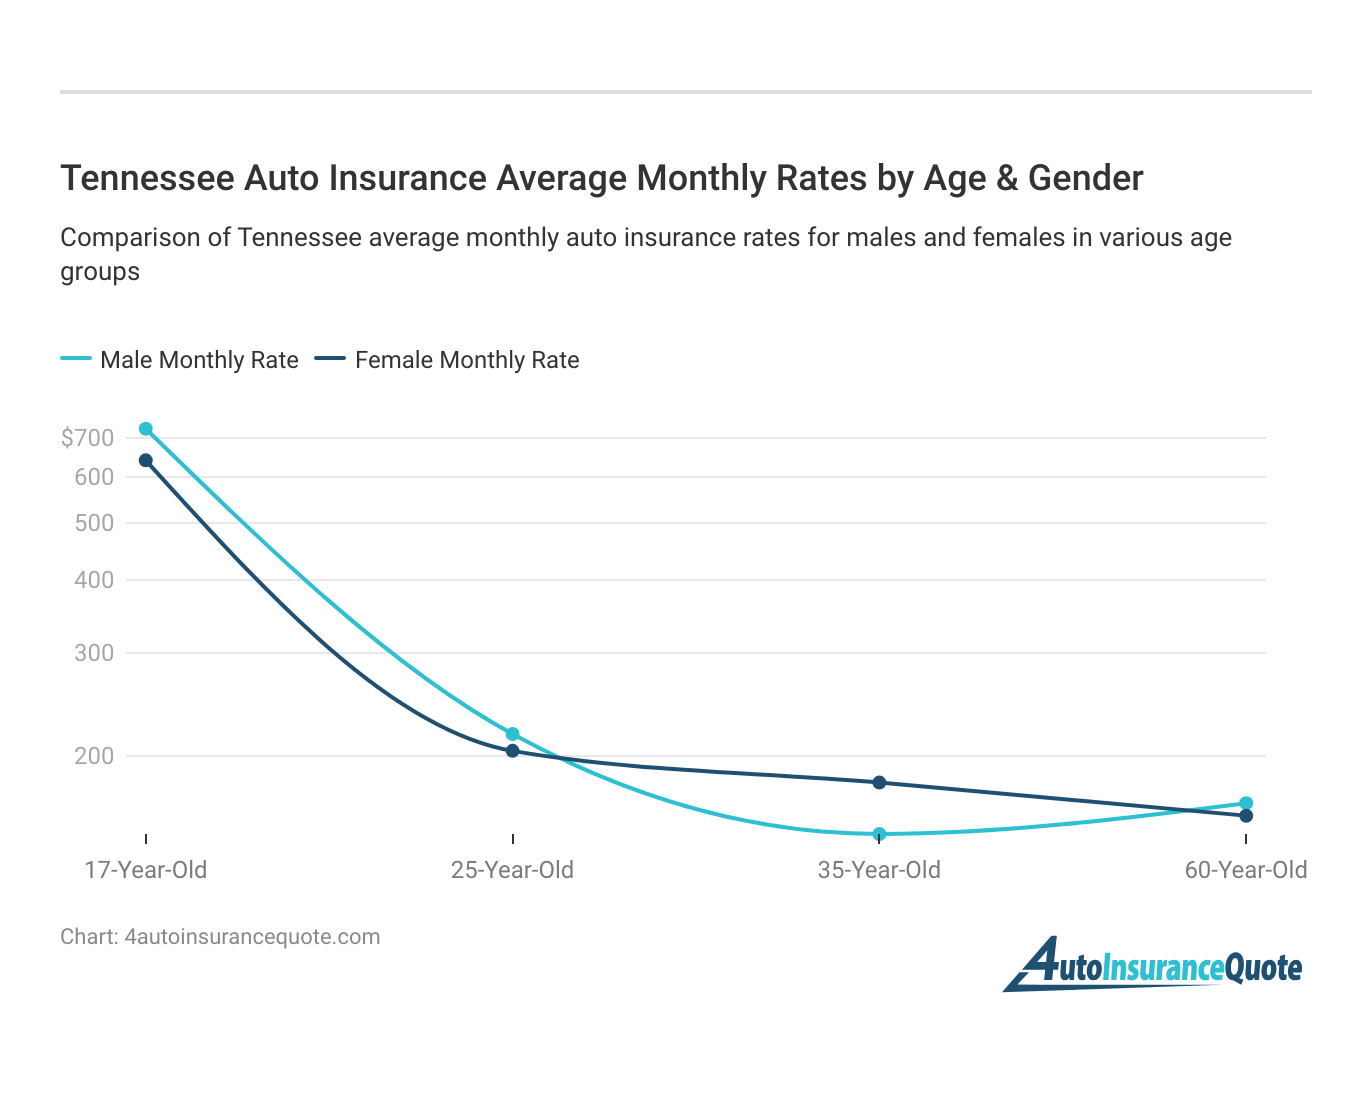 <h3>Tennessee Auto Insurance Average Monthly Rates by Age & Gender</h3>